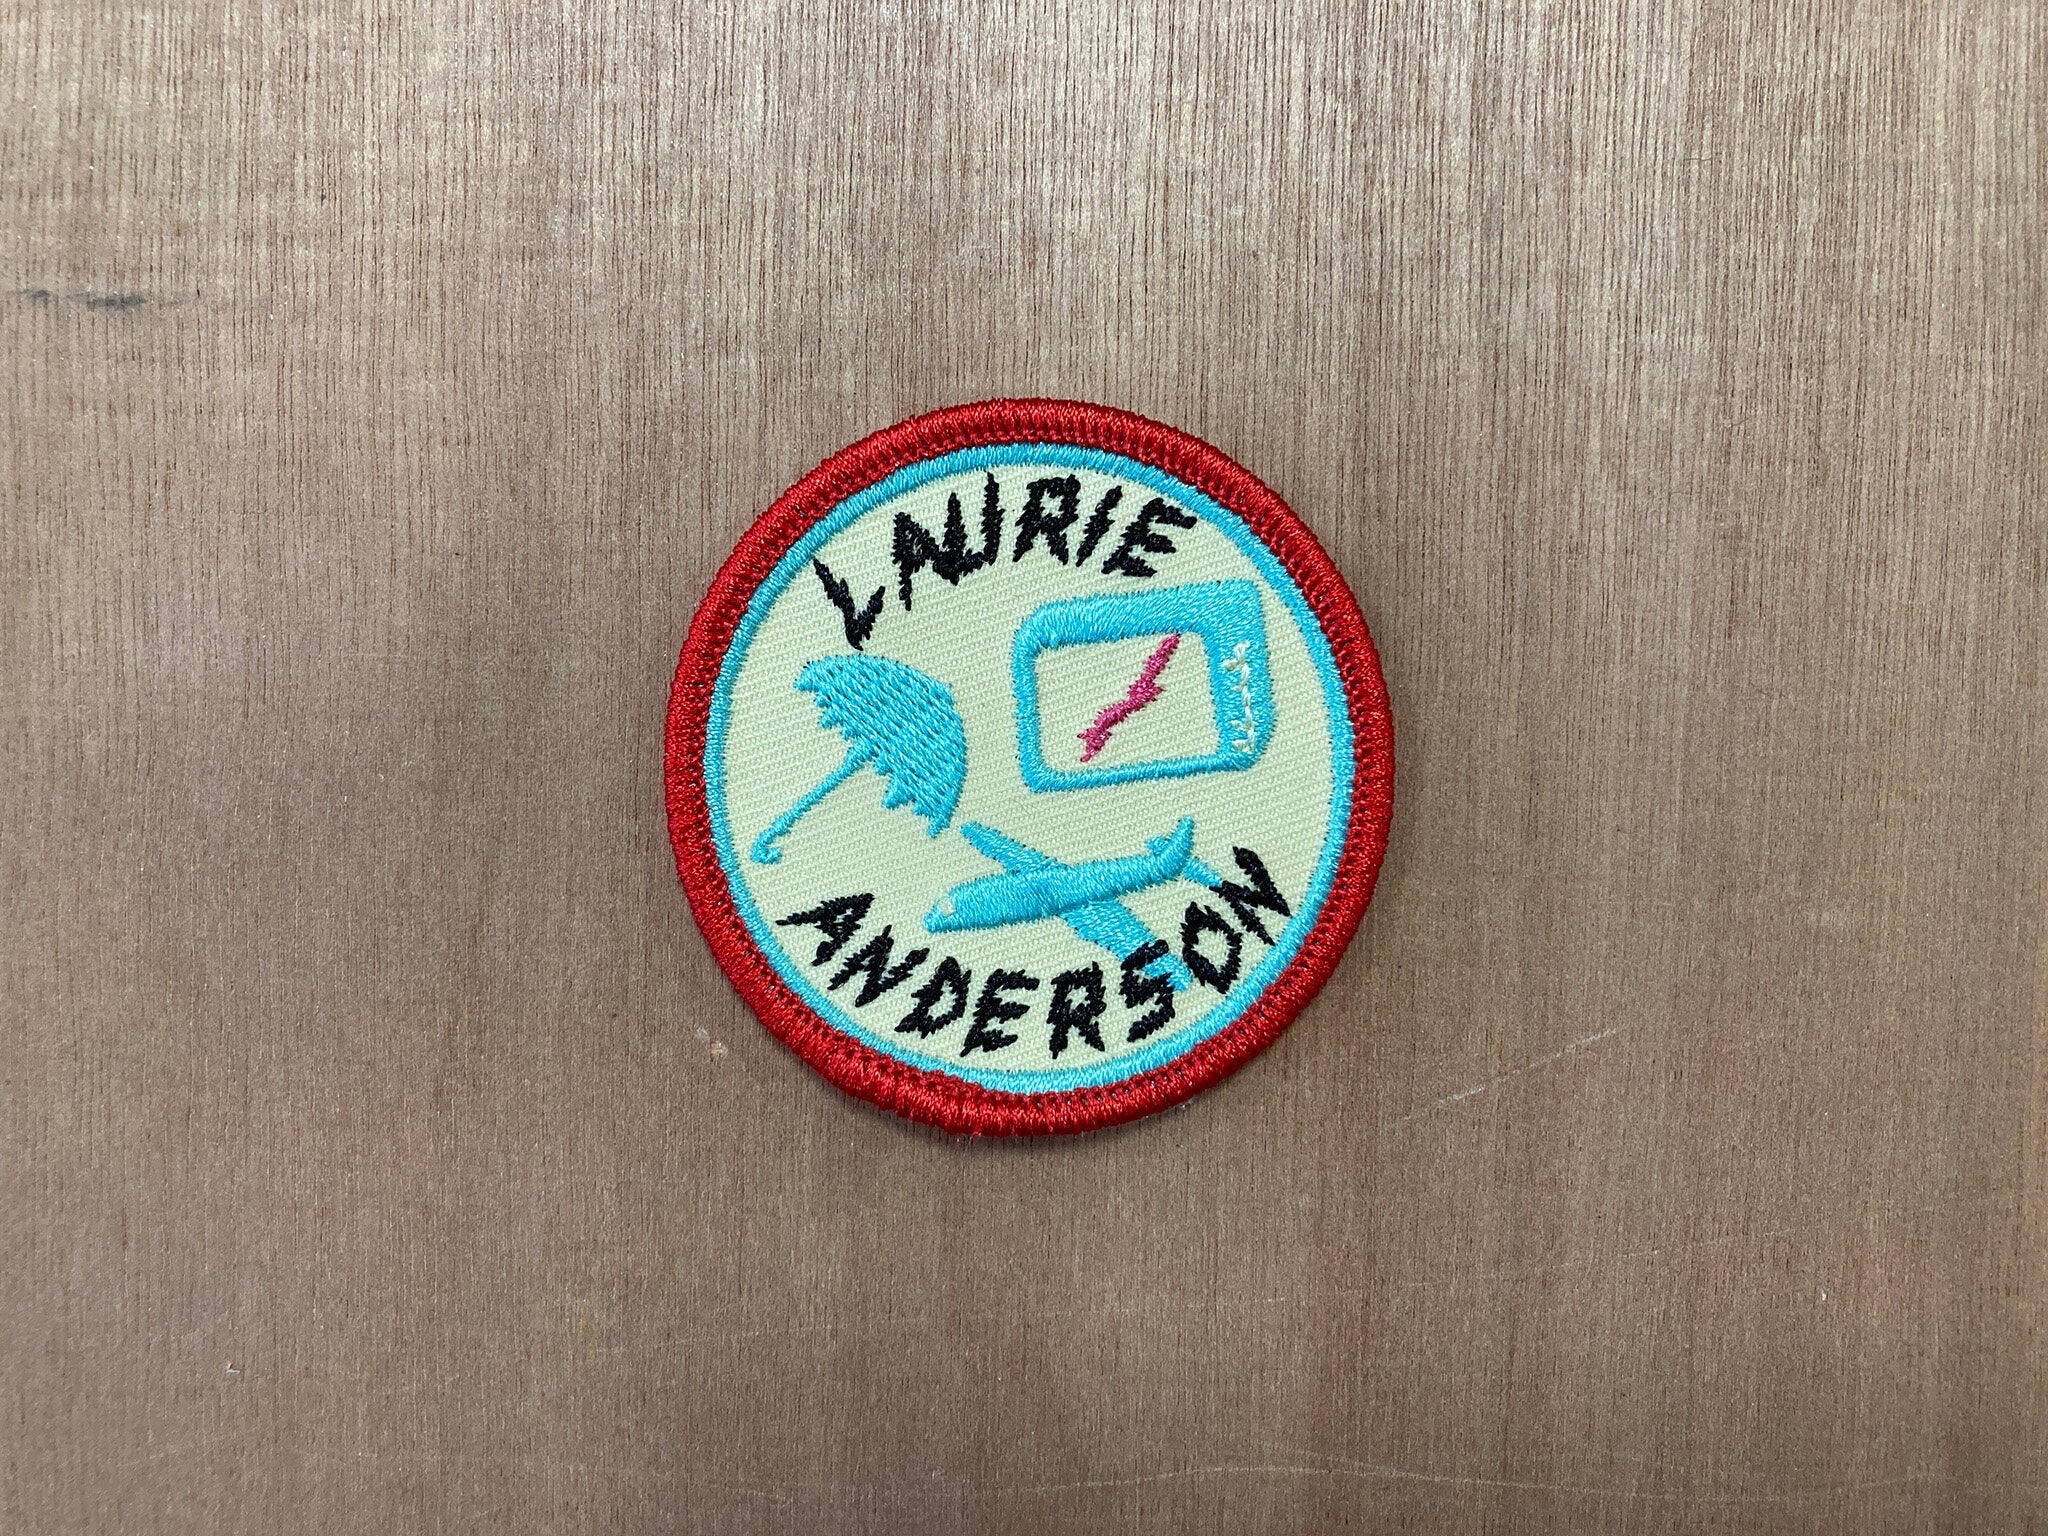 LAURIE ANDERSON PATCH by Giles Bailey